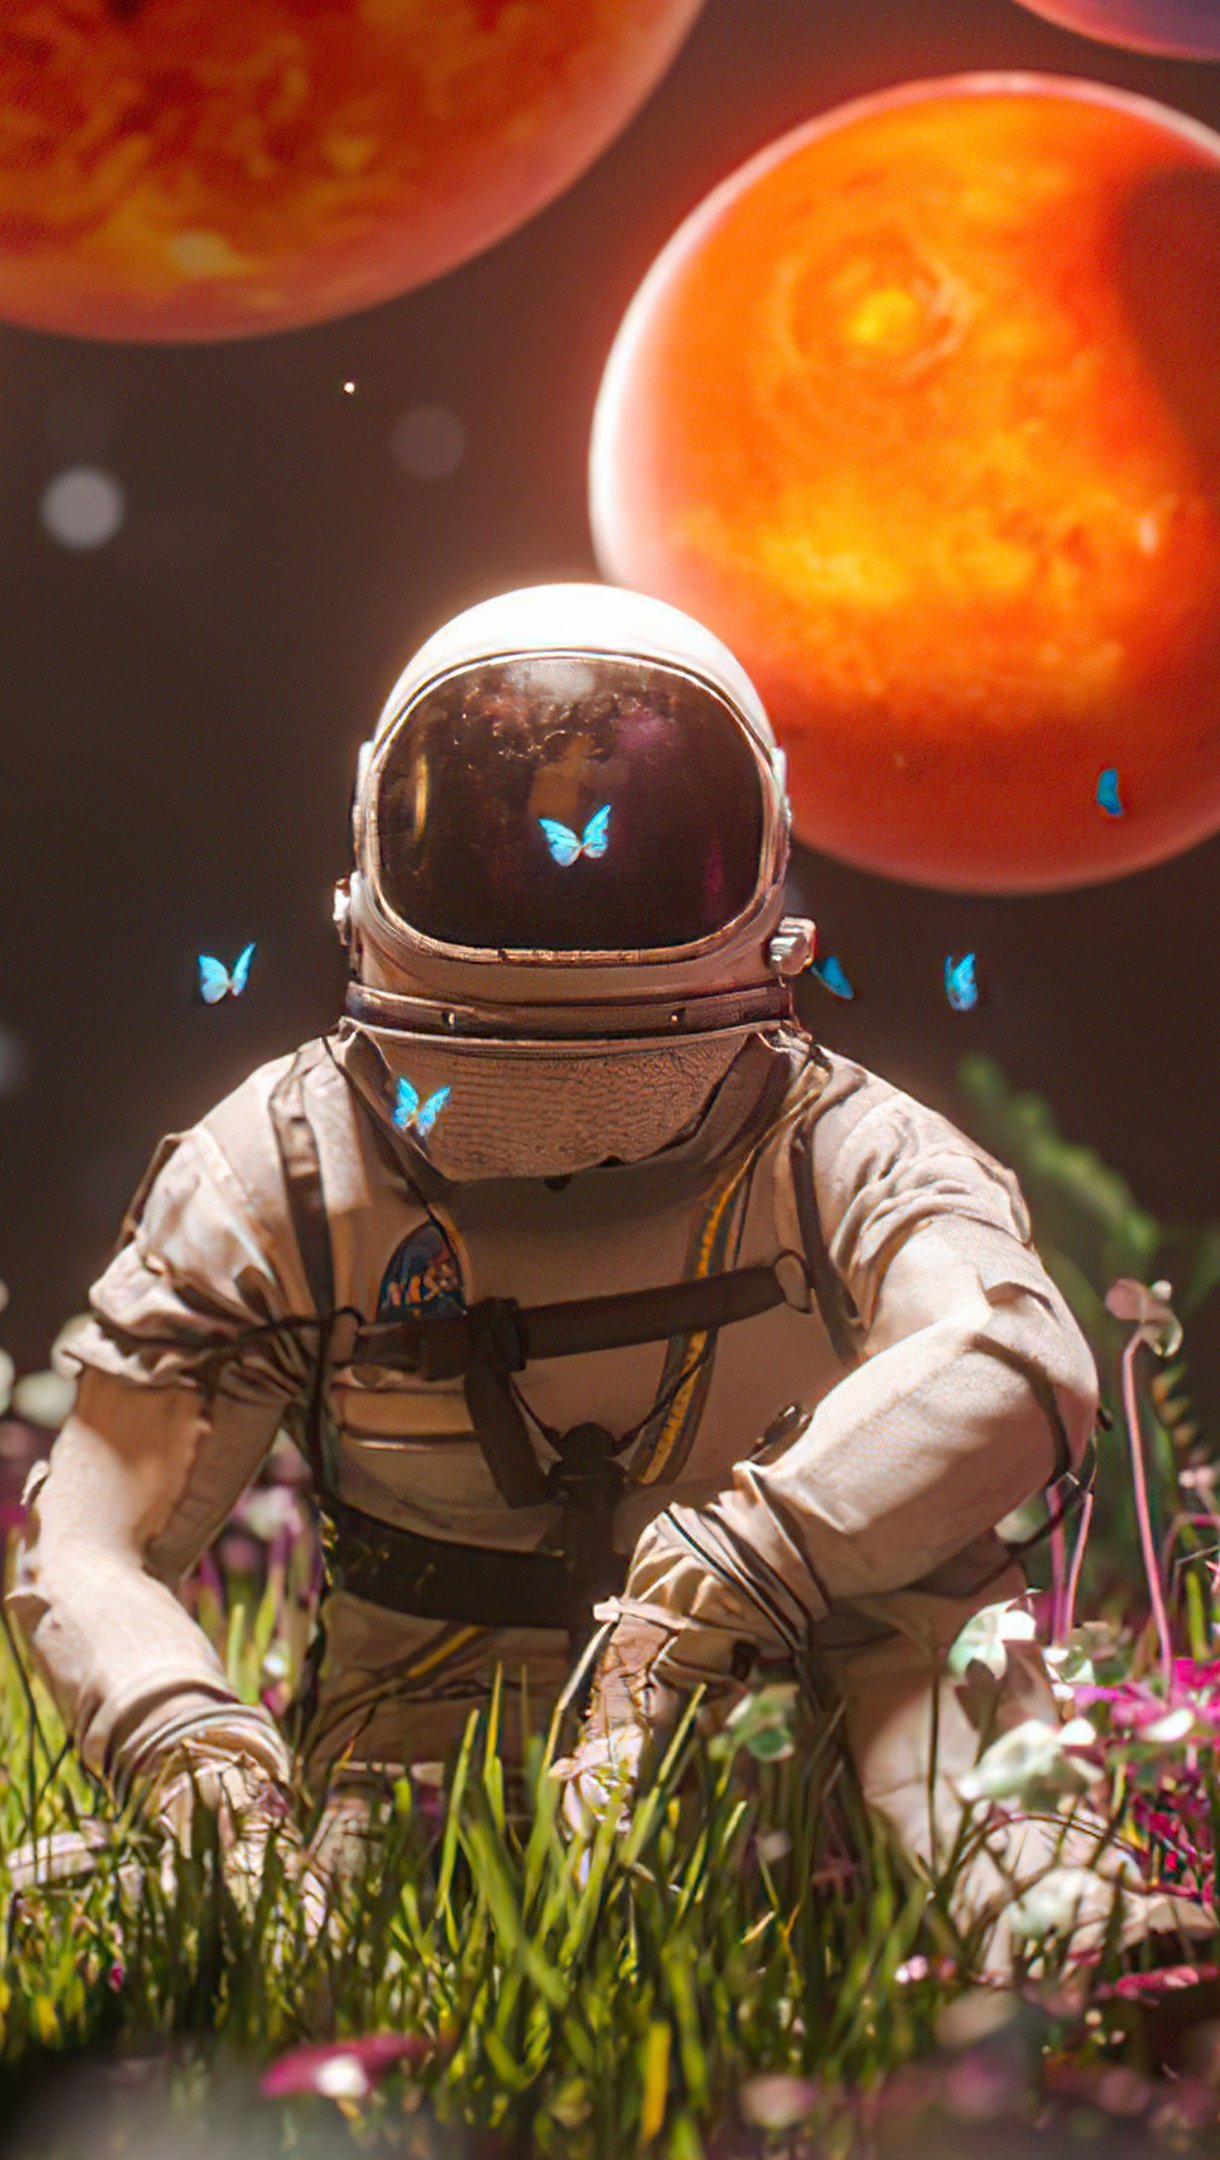 Wallpaper Astronaut with planets and flowers Vertical